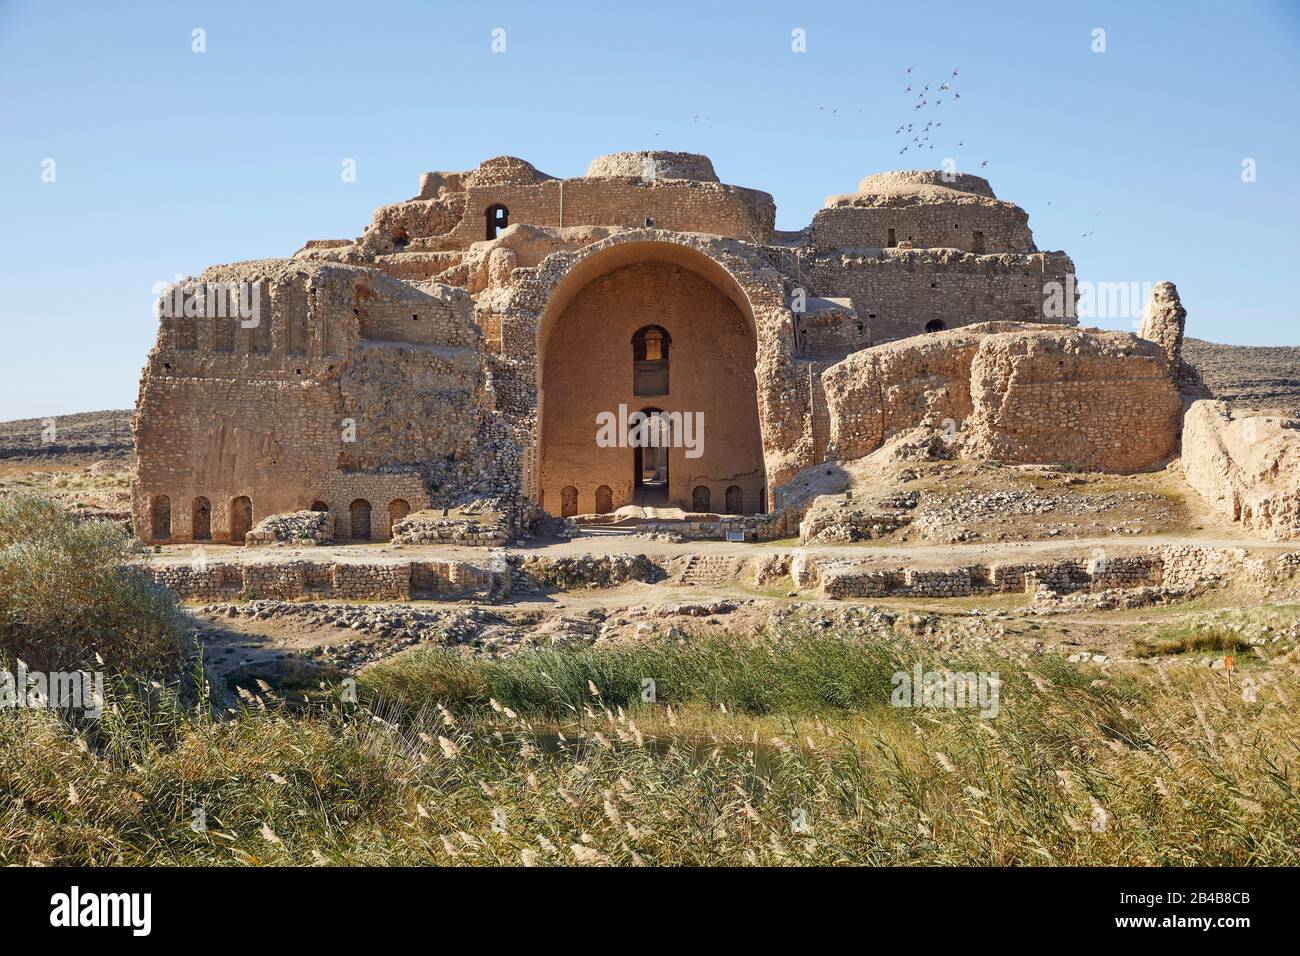 The former palace of Ardeshirs I in the Iranian city of Firuzabad, taken on 04.12.2017. The city was founded by Ardeshir I, the founder of the Sassanian Empire, and used as a residence. | usage worldwide Stock Photo